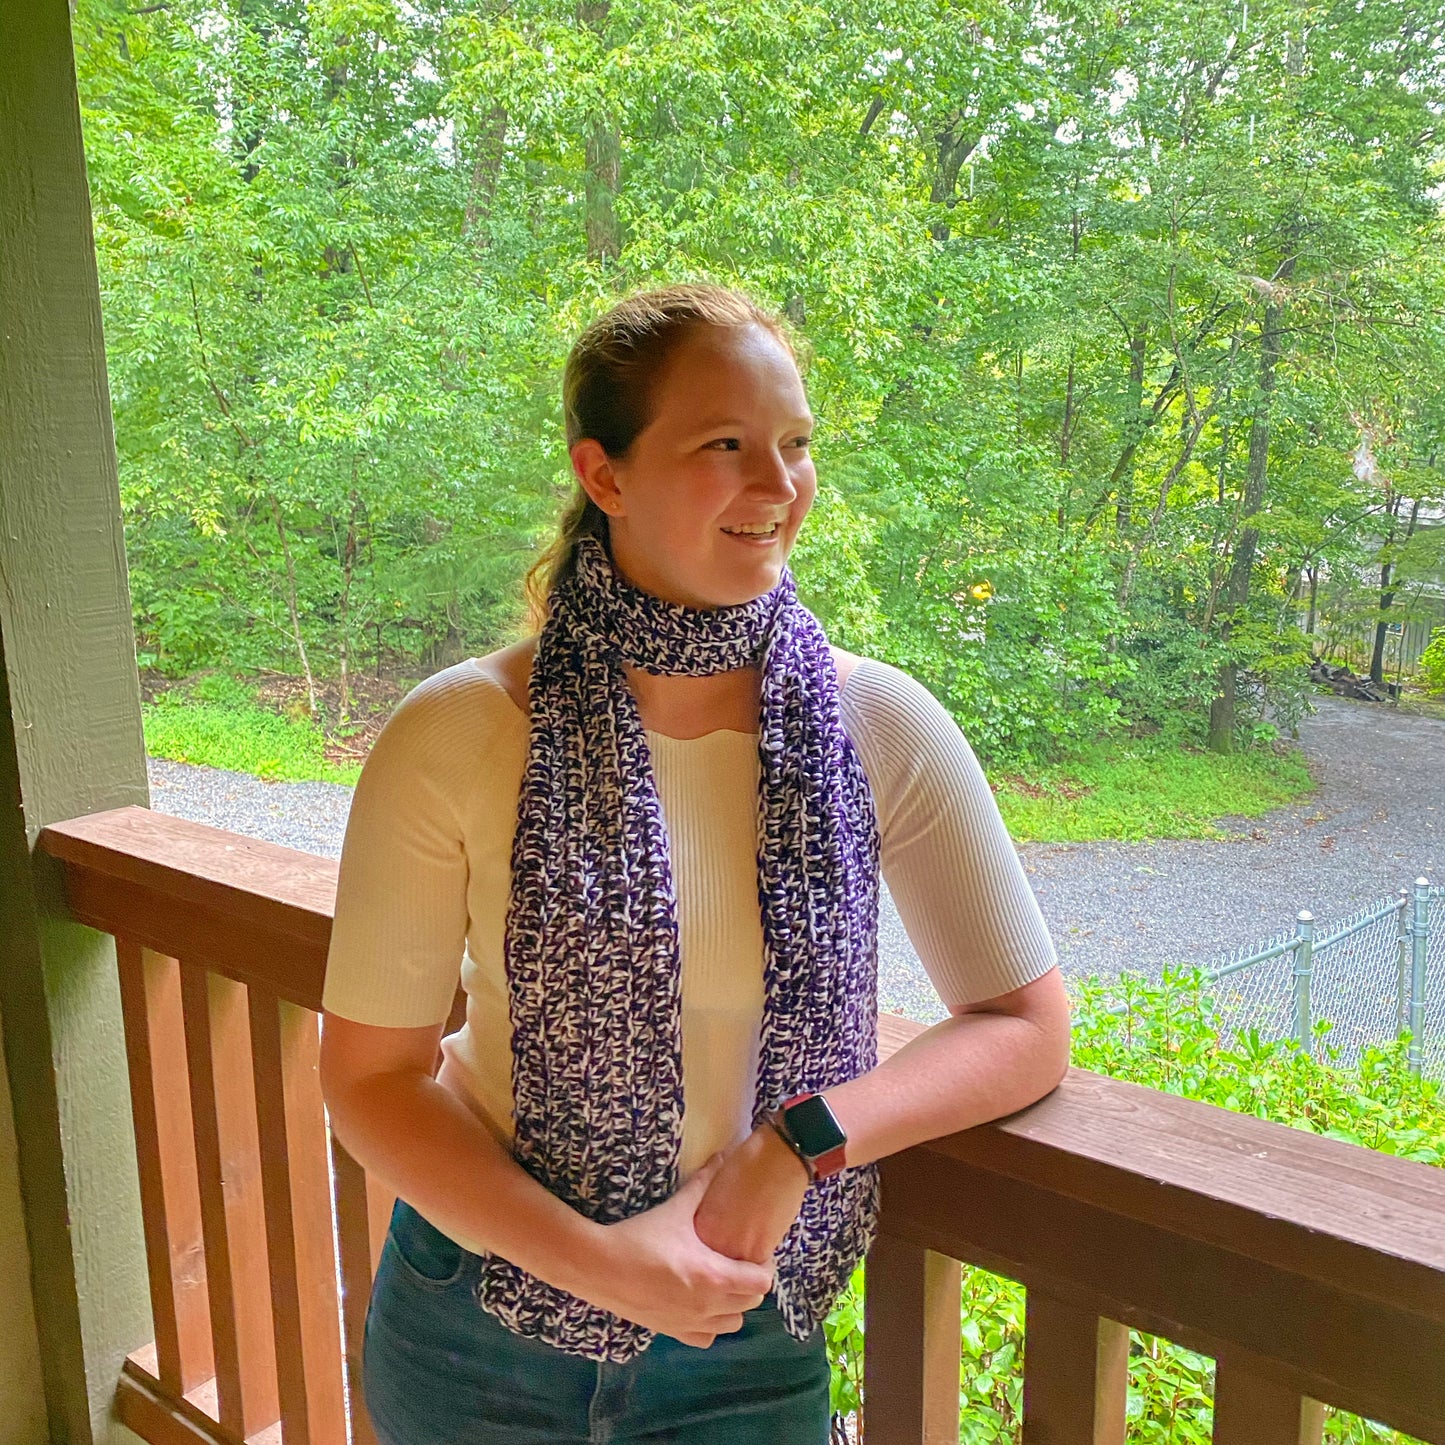 Double Stranded Scarf